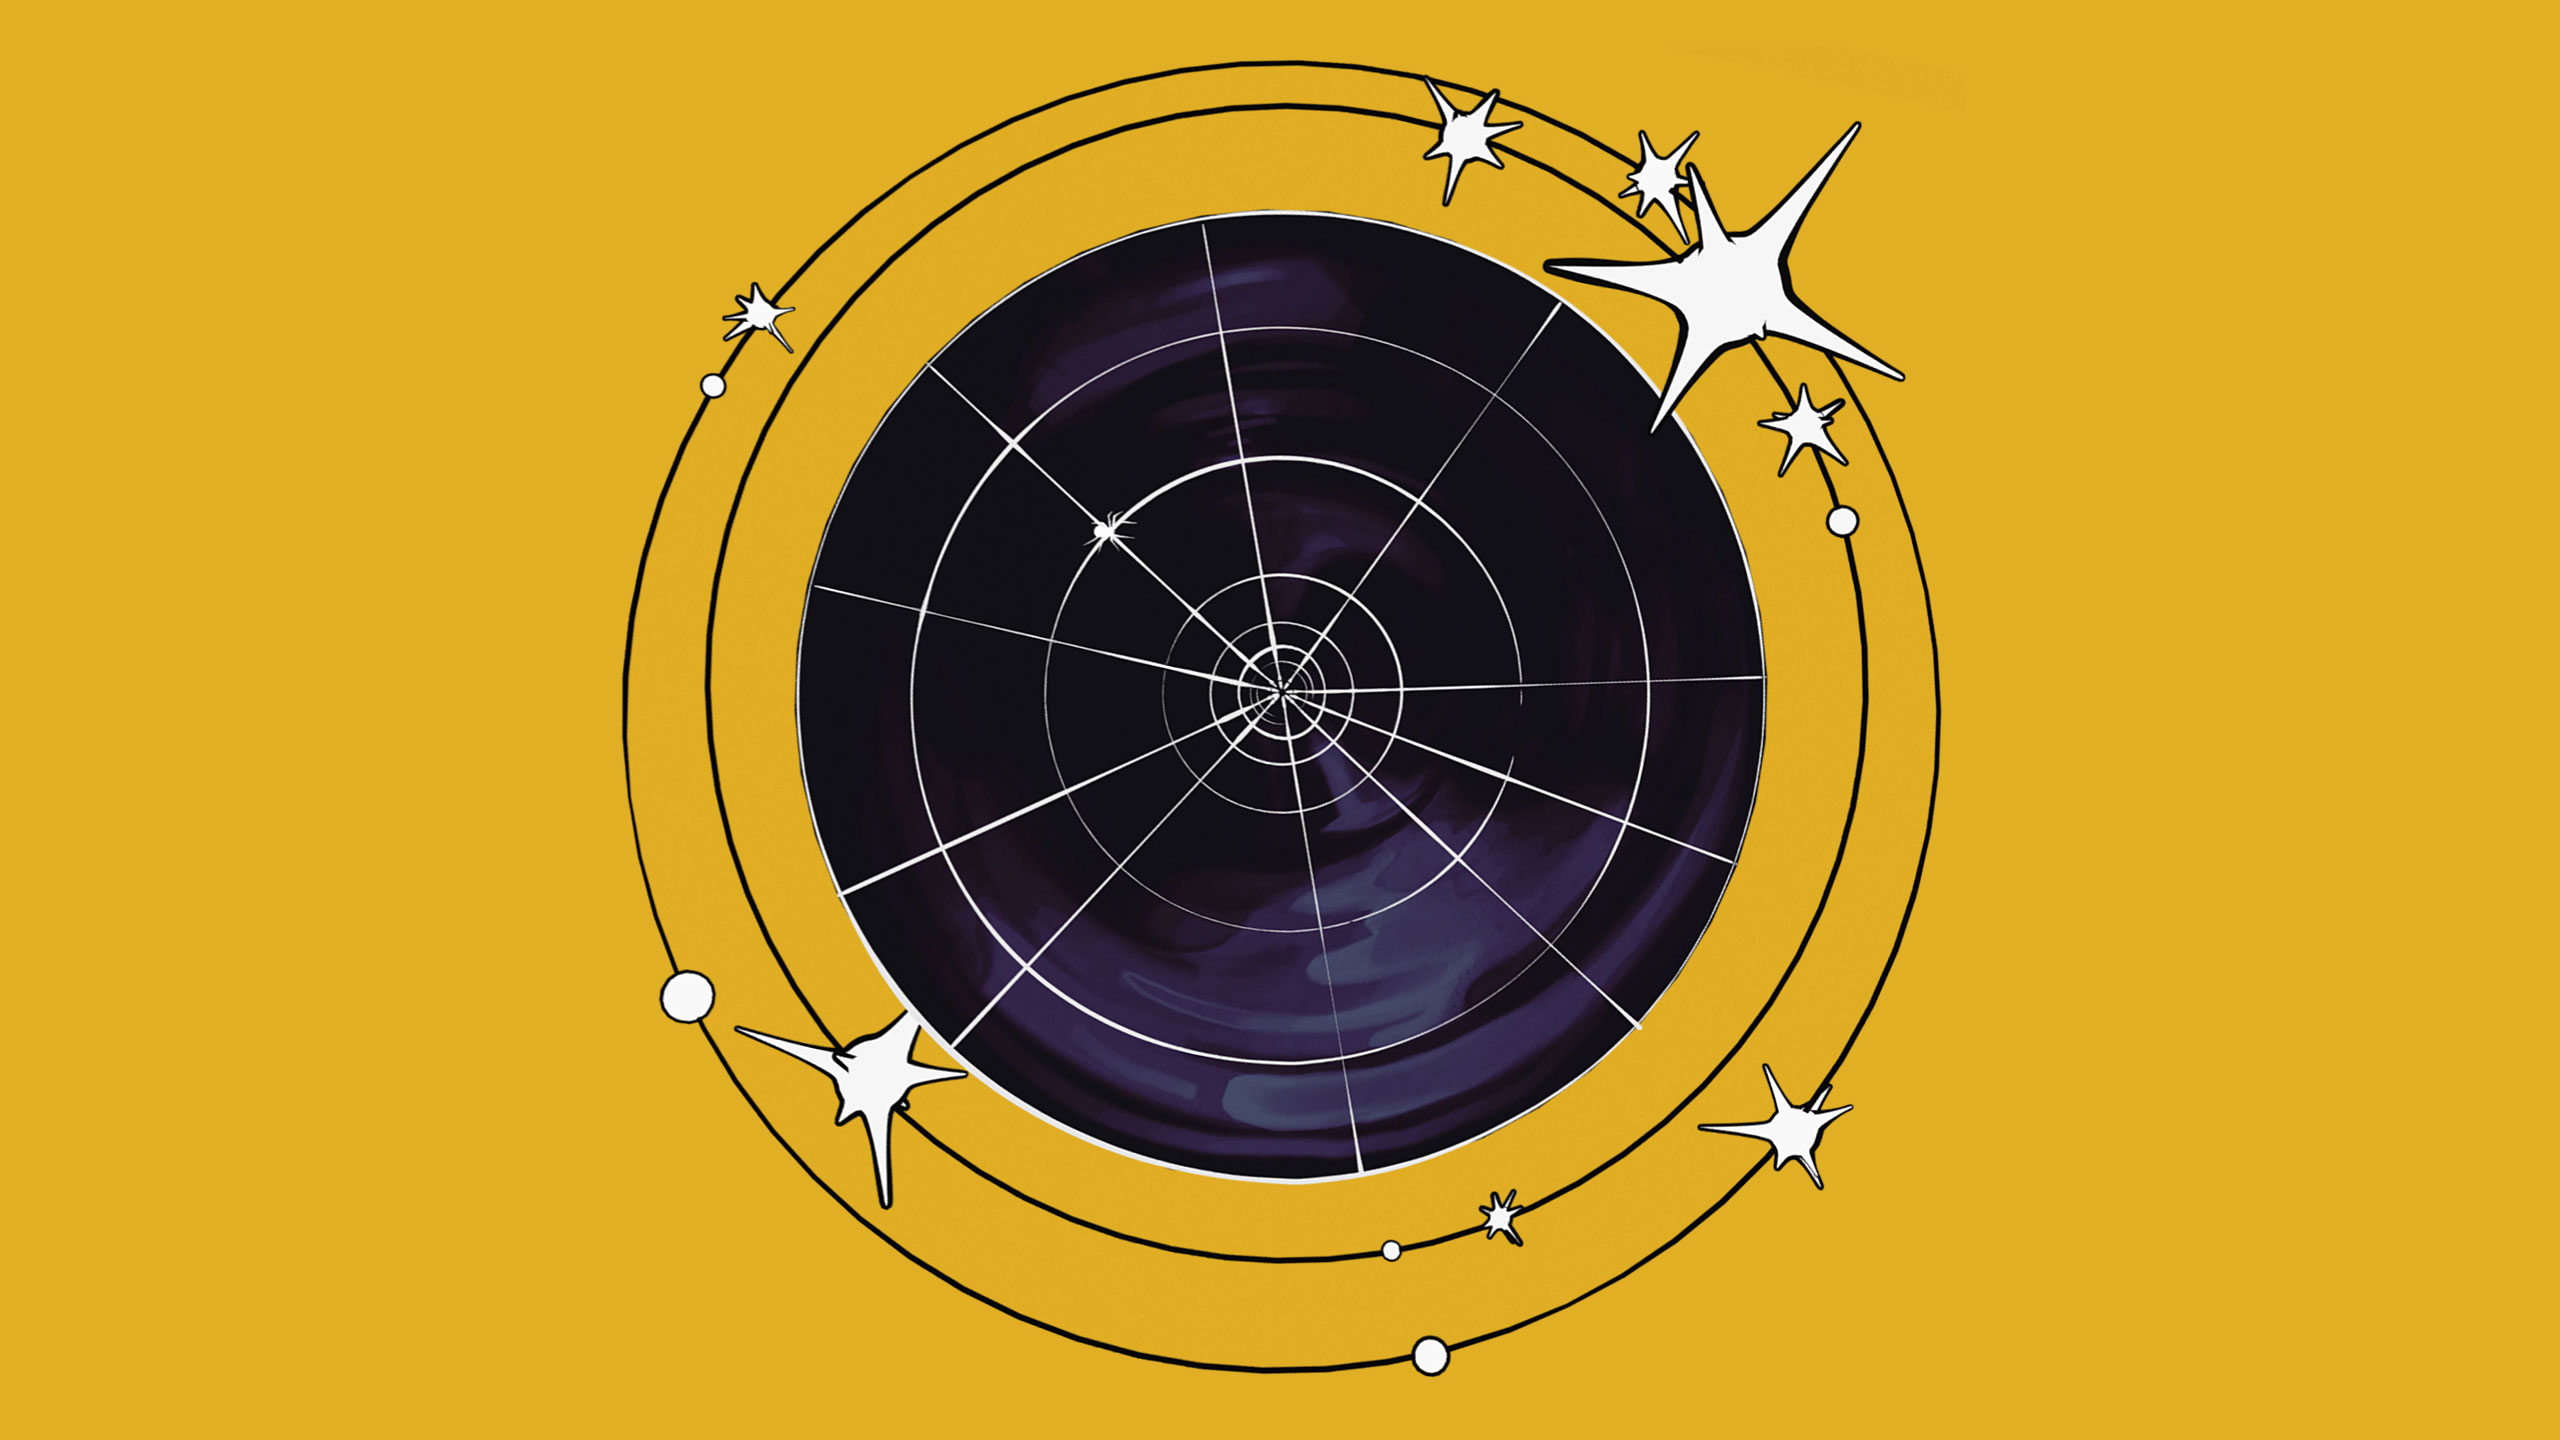 Art on a yellow background: a black circle with a white spider web on it, orbited by stars.